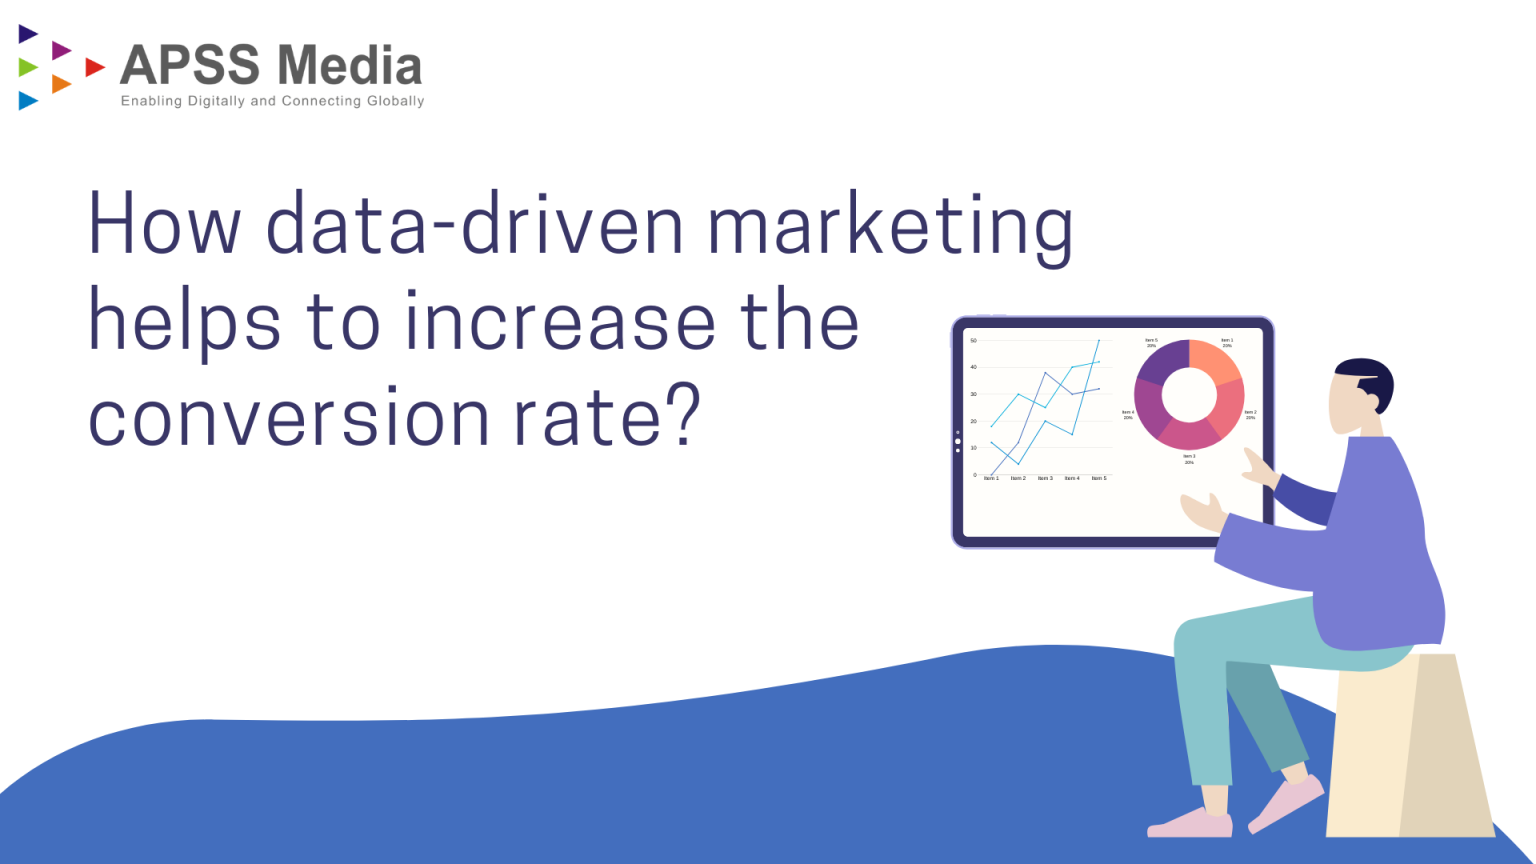 How data-driven marketing helps to increase the conversion rate? - APSS Media